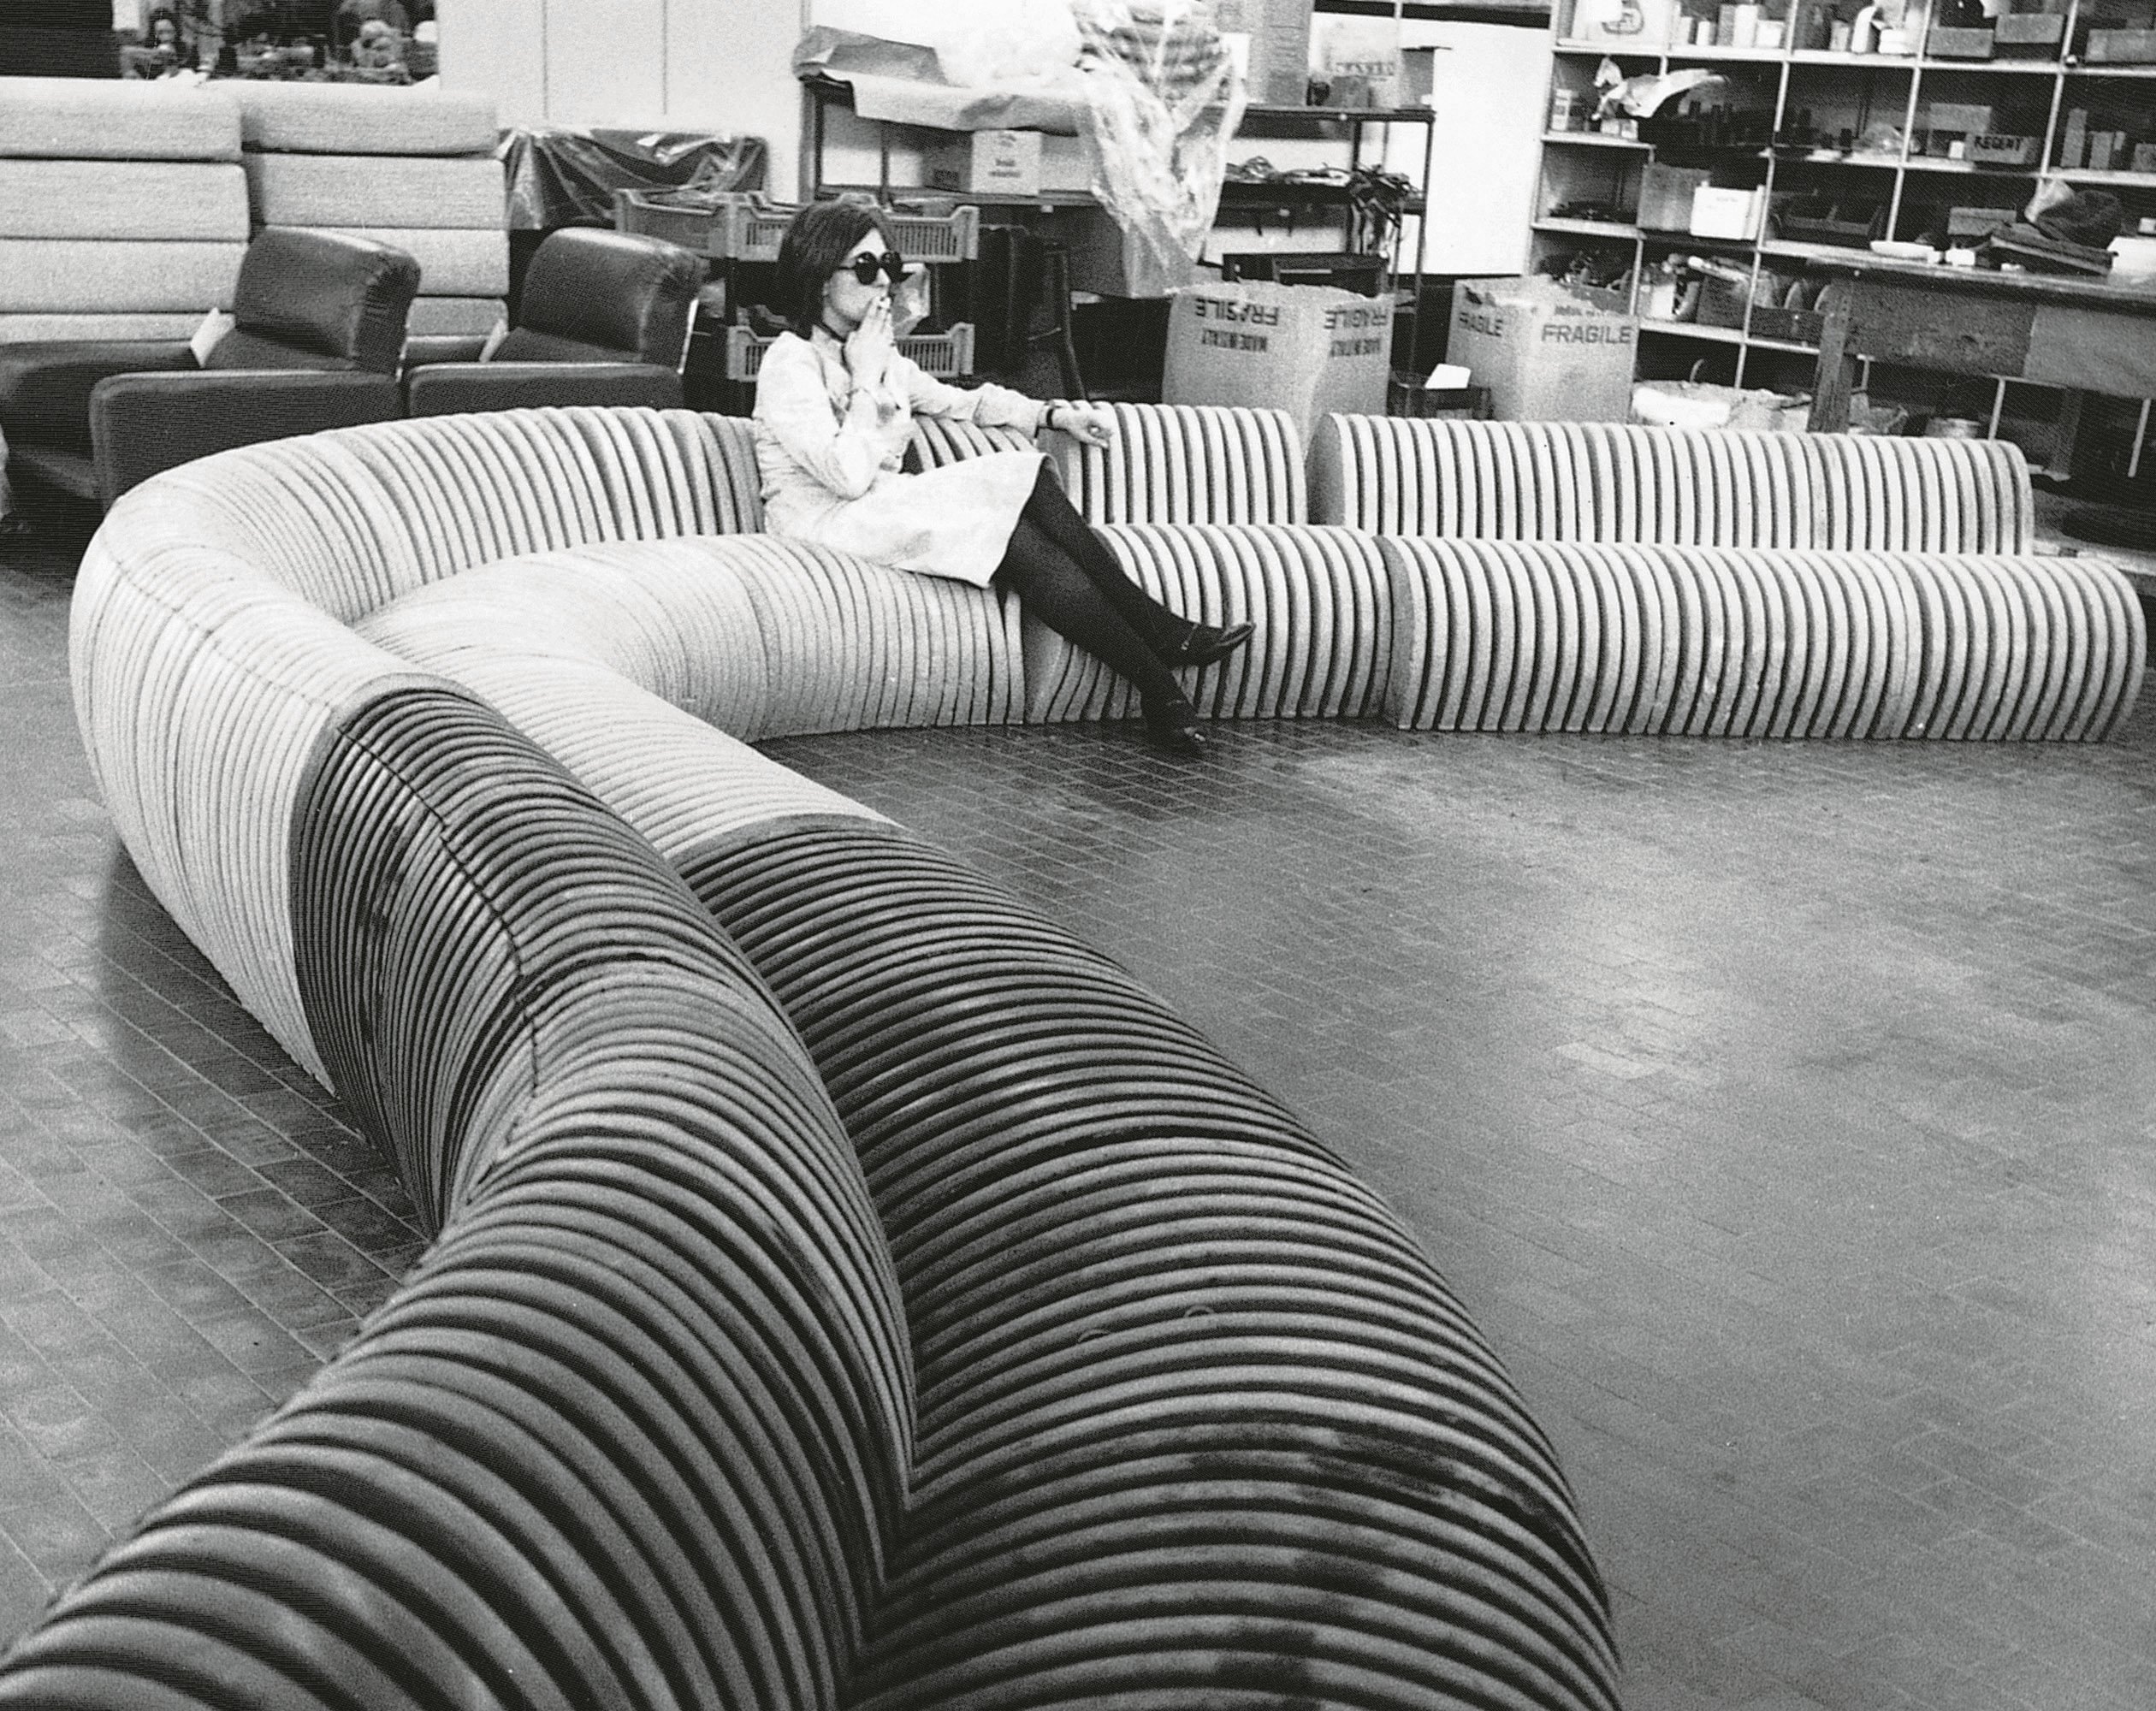 Cini Boeri's first design for Arflex was the Serpentone sofa, an idea that produced the endless sofa using new materials and an innovative manufacturing process. Launched at the Milan Furniture Fair in 1971, pieces of the orgigiinal sofa can be found in gallery collections around the world. Photo c/o Arflex. 